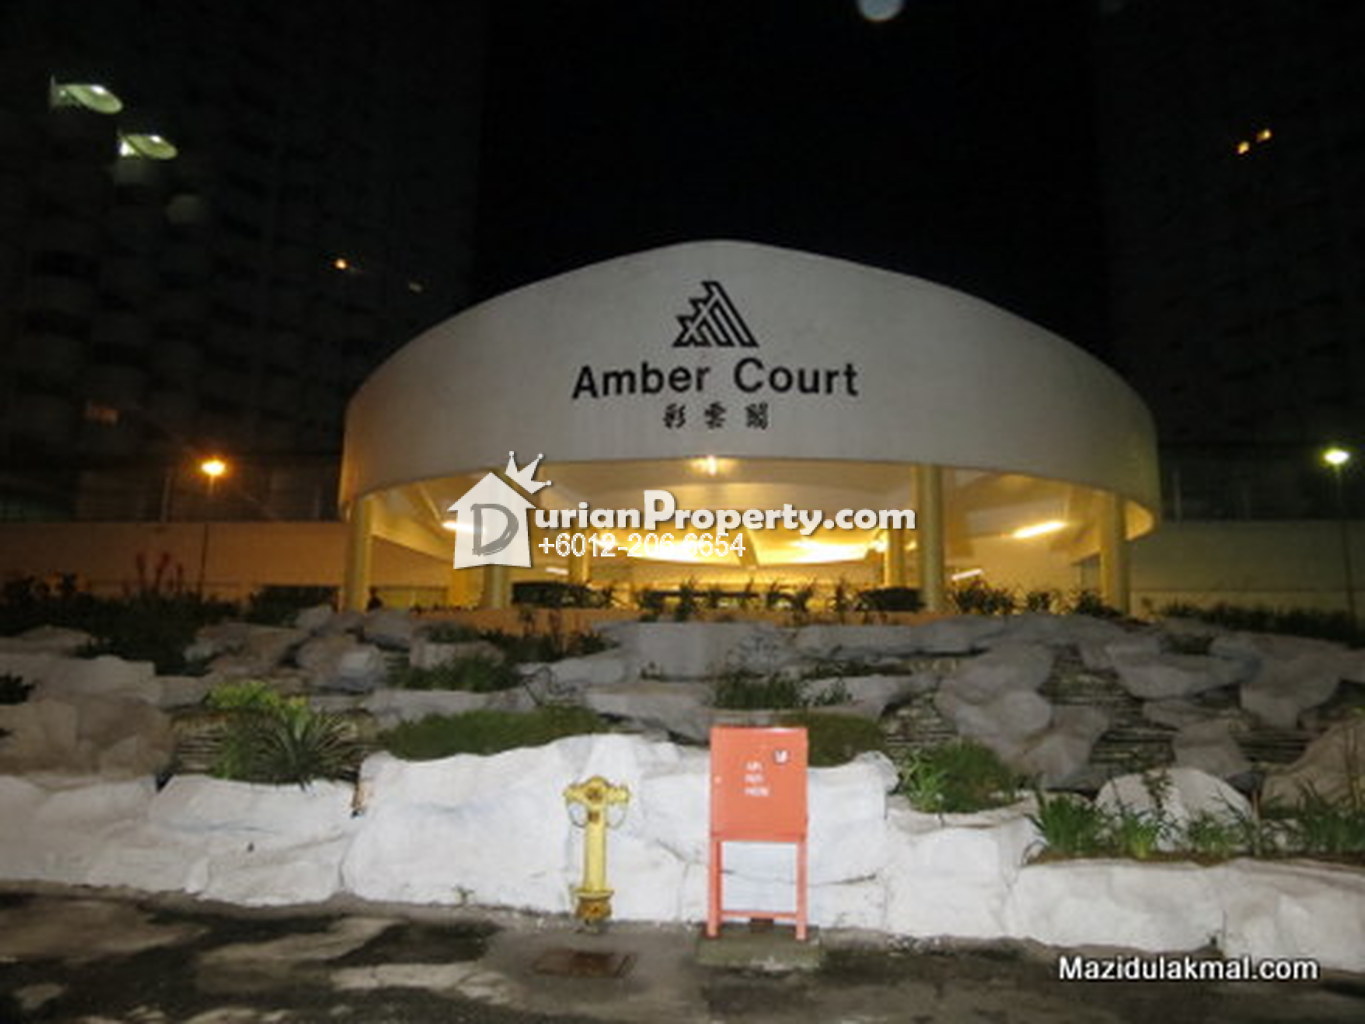 Apartment For Sale At Amber Court Genting Highlands For Rm 688 000 By Gary Kee Durianproperty